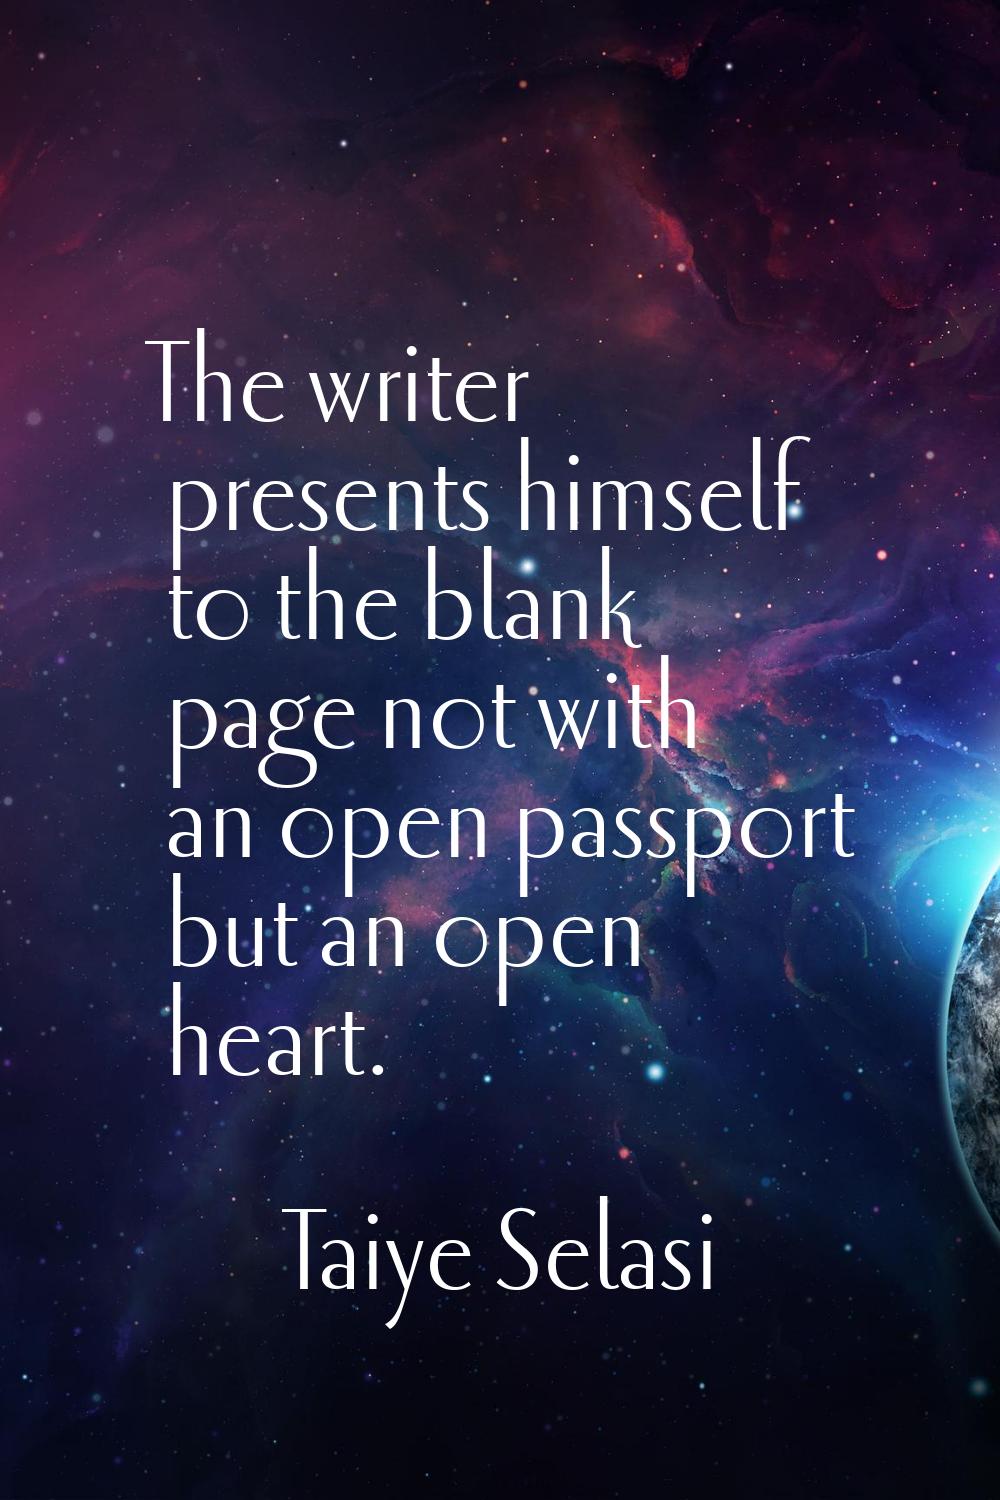 The writer presents himself to the blank page not with an open passport but an open heart.